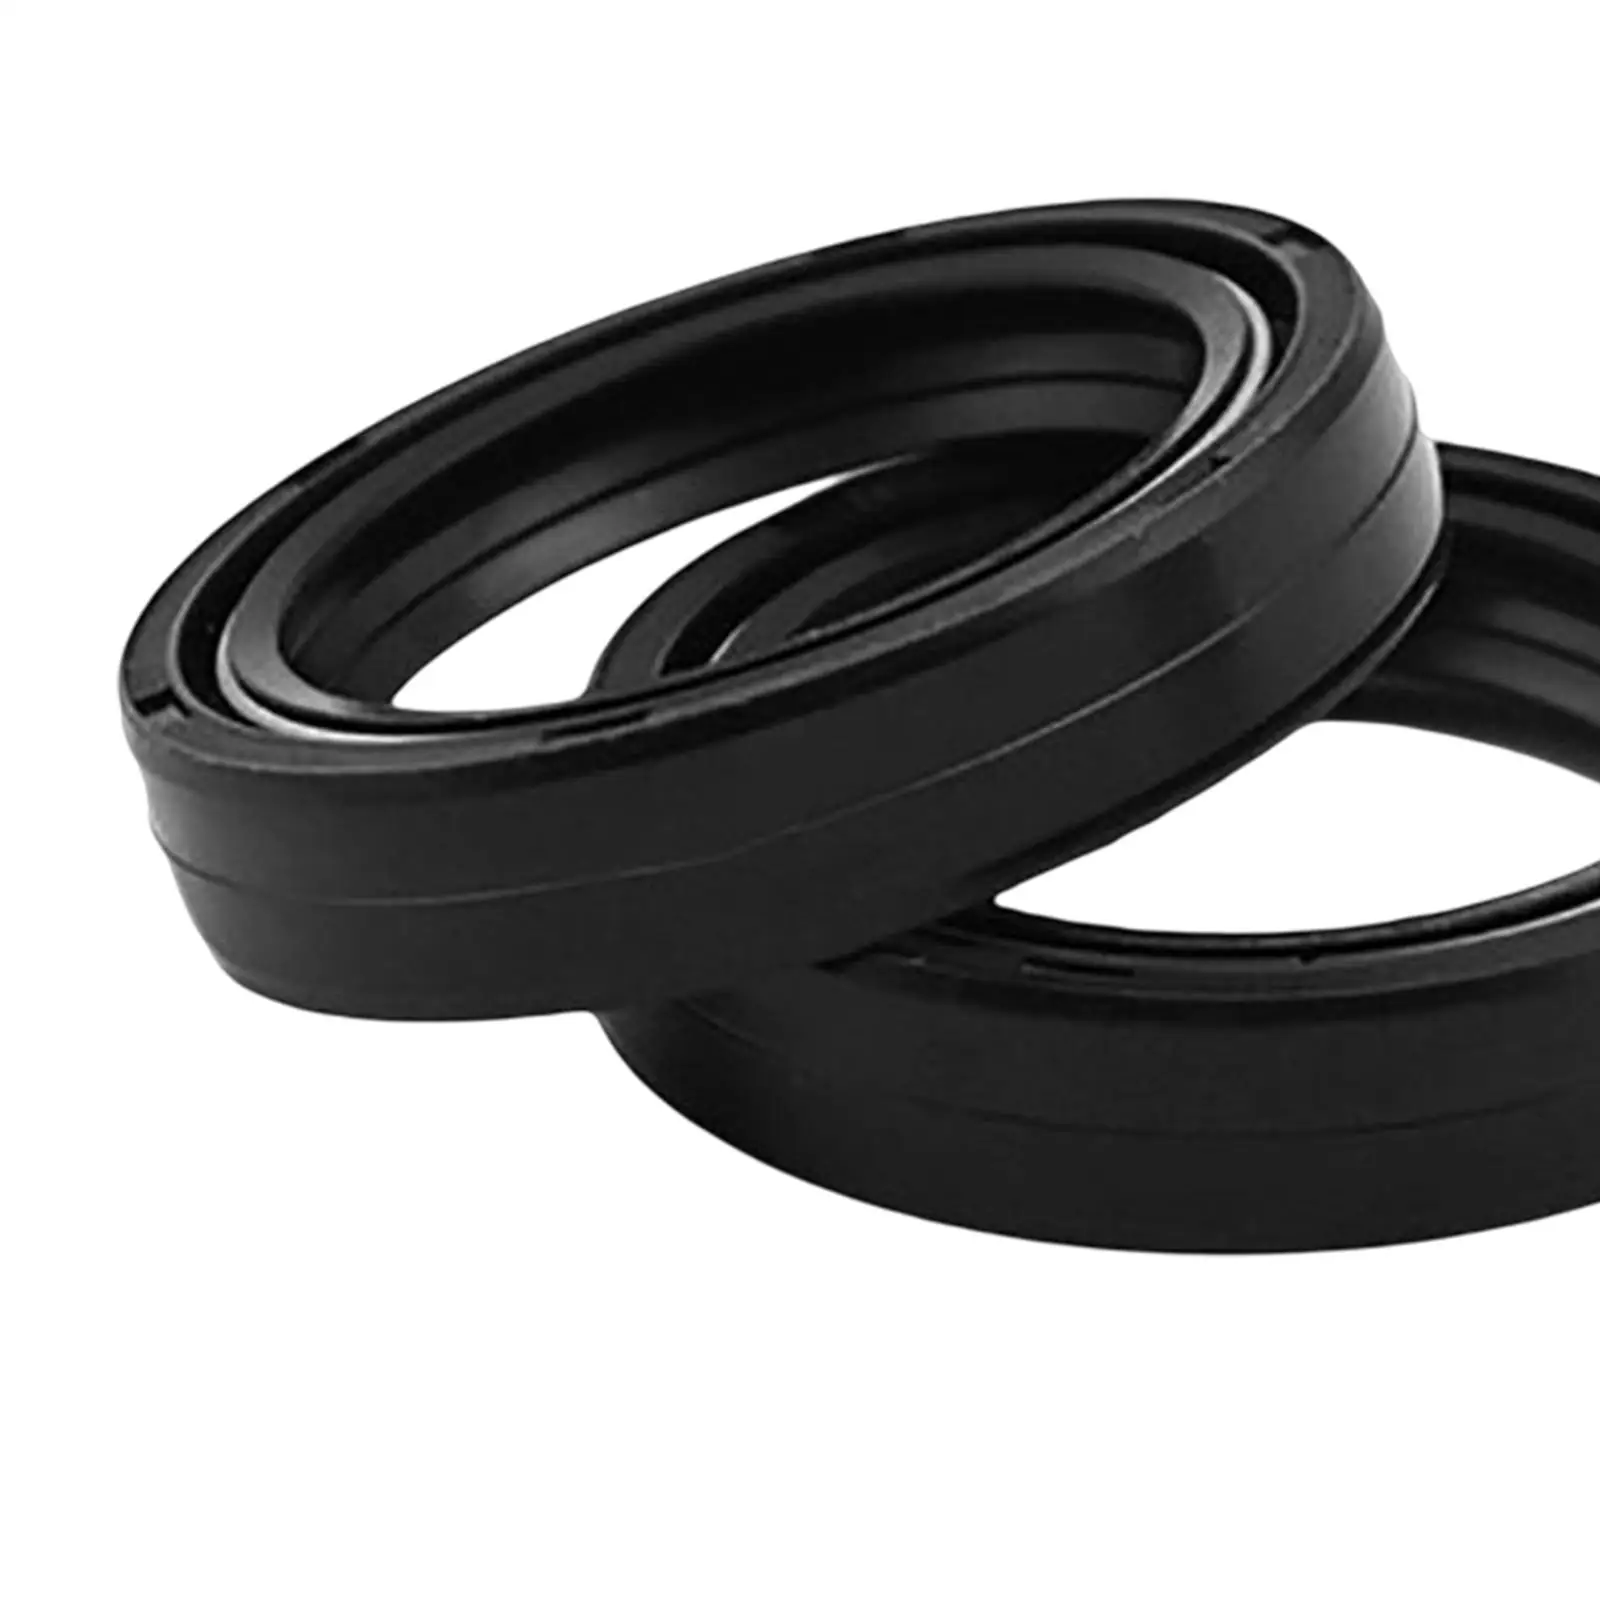 Motorcycle Fork Seal and Dust Seal Kit 49x60x10mm Rubber for Klx400 VN2000